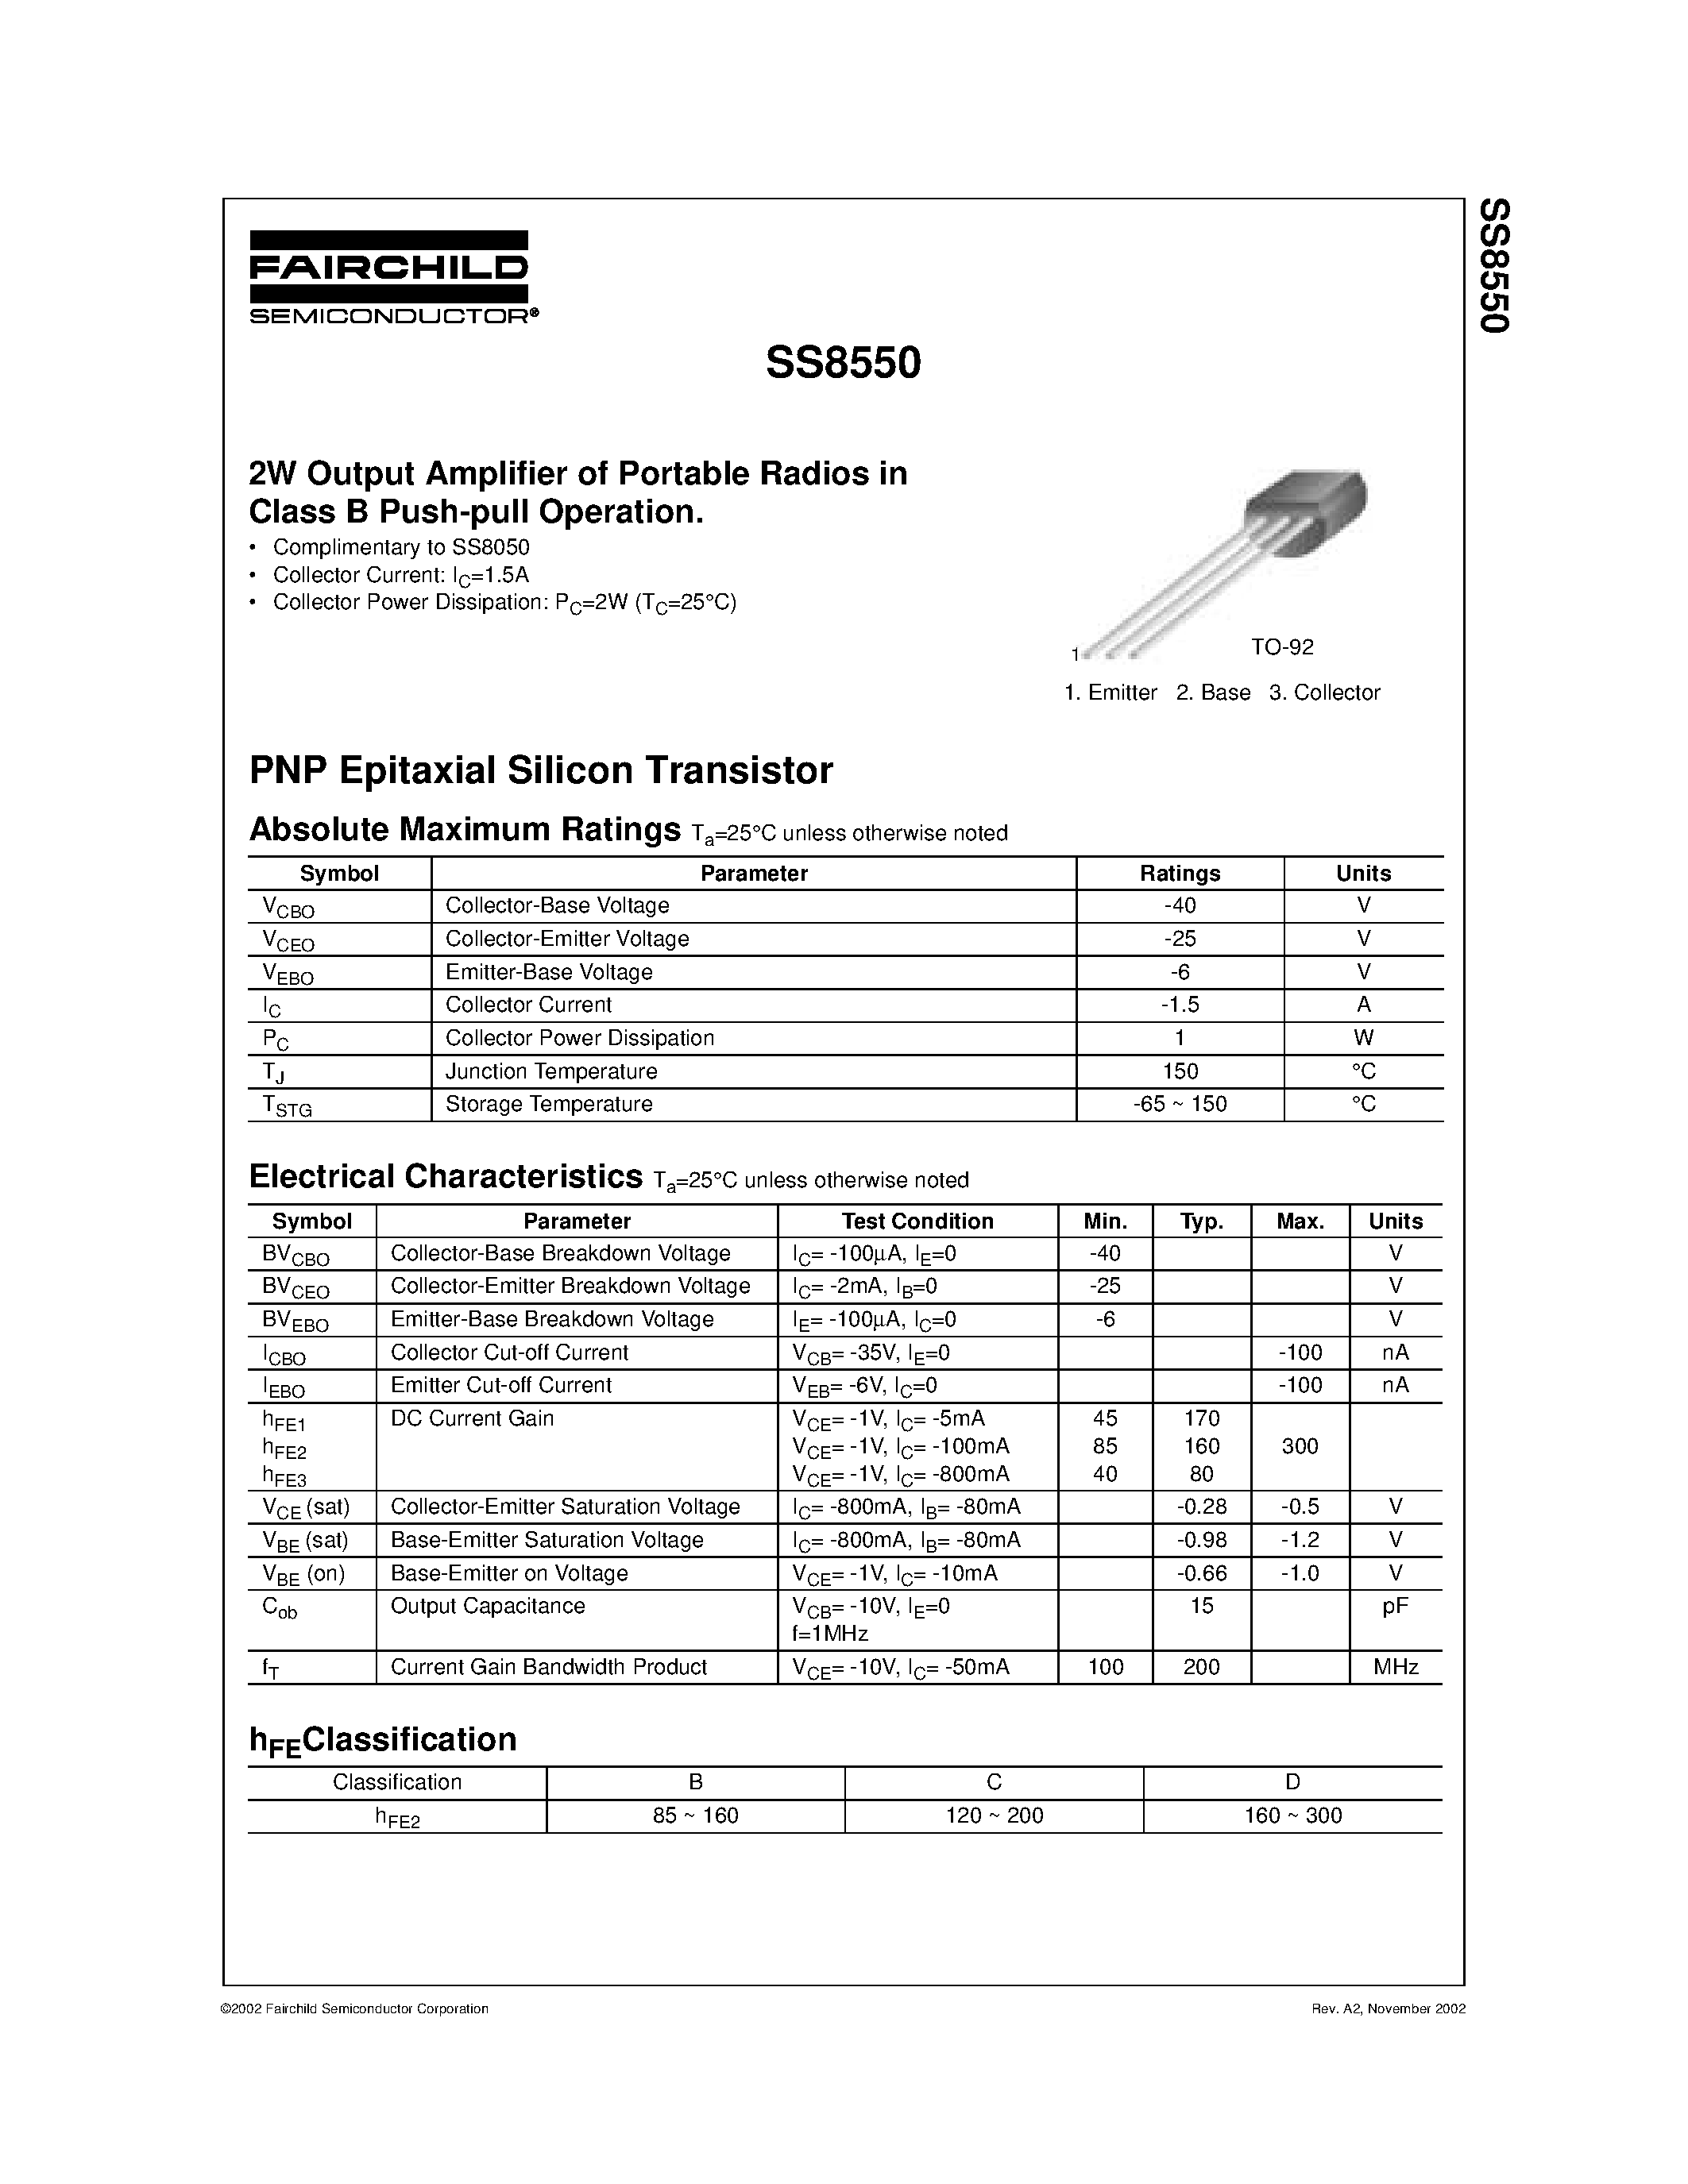 Datasheet SS8550 - 2W Output Amplifier of Portable Radios in Class B Push-pull Operation page 1